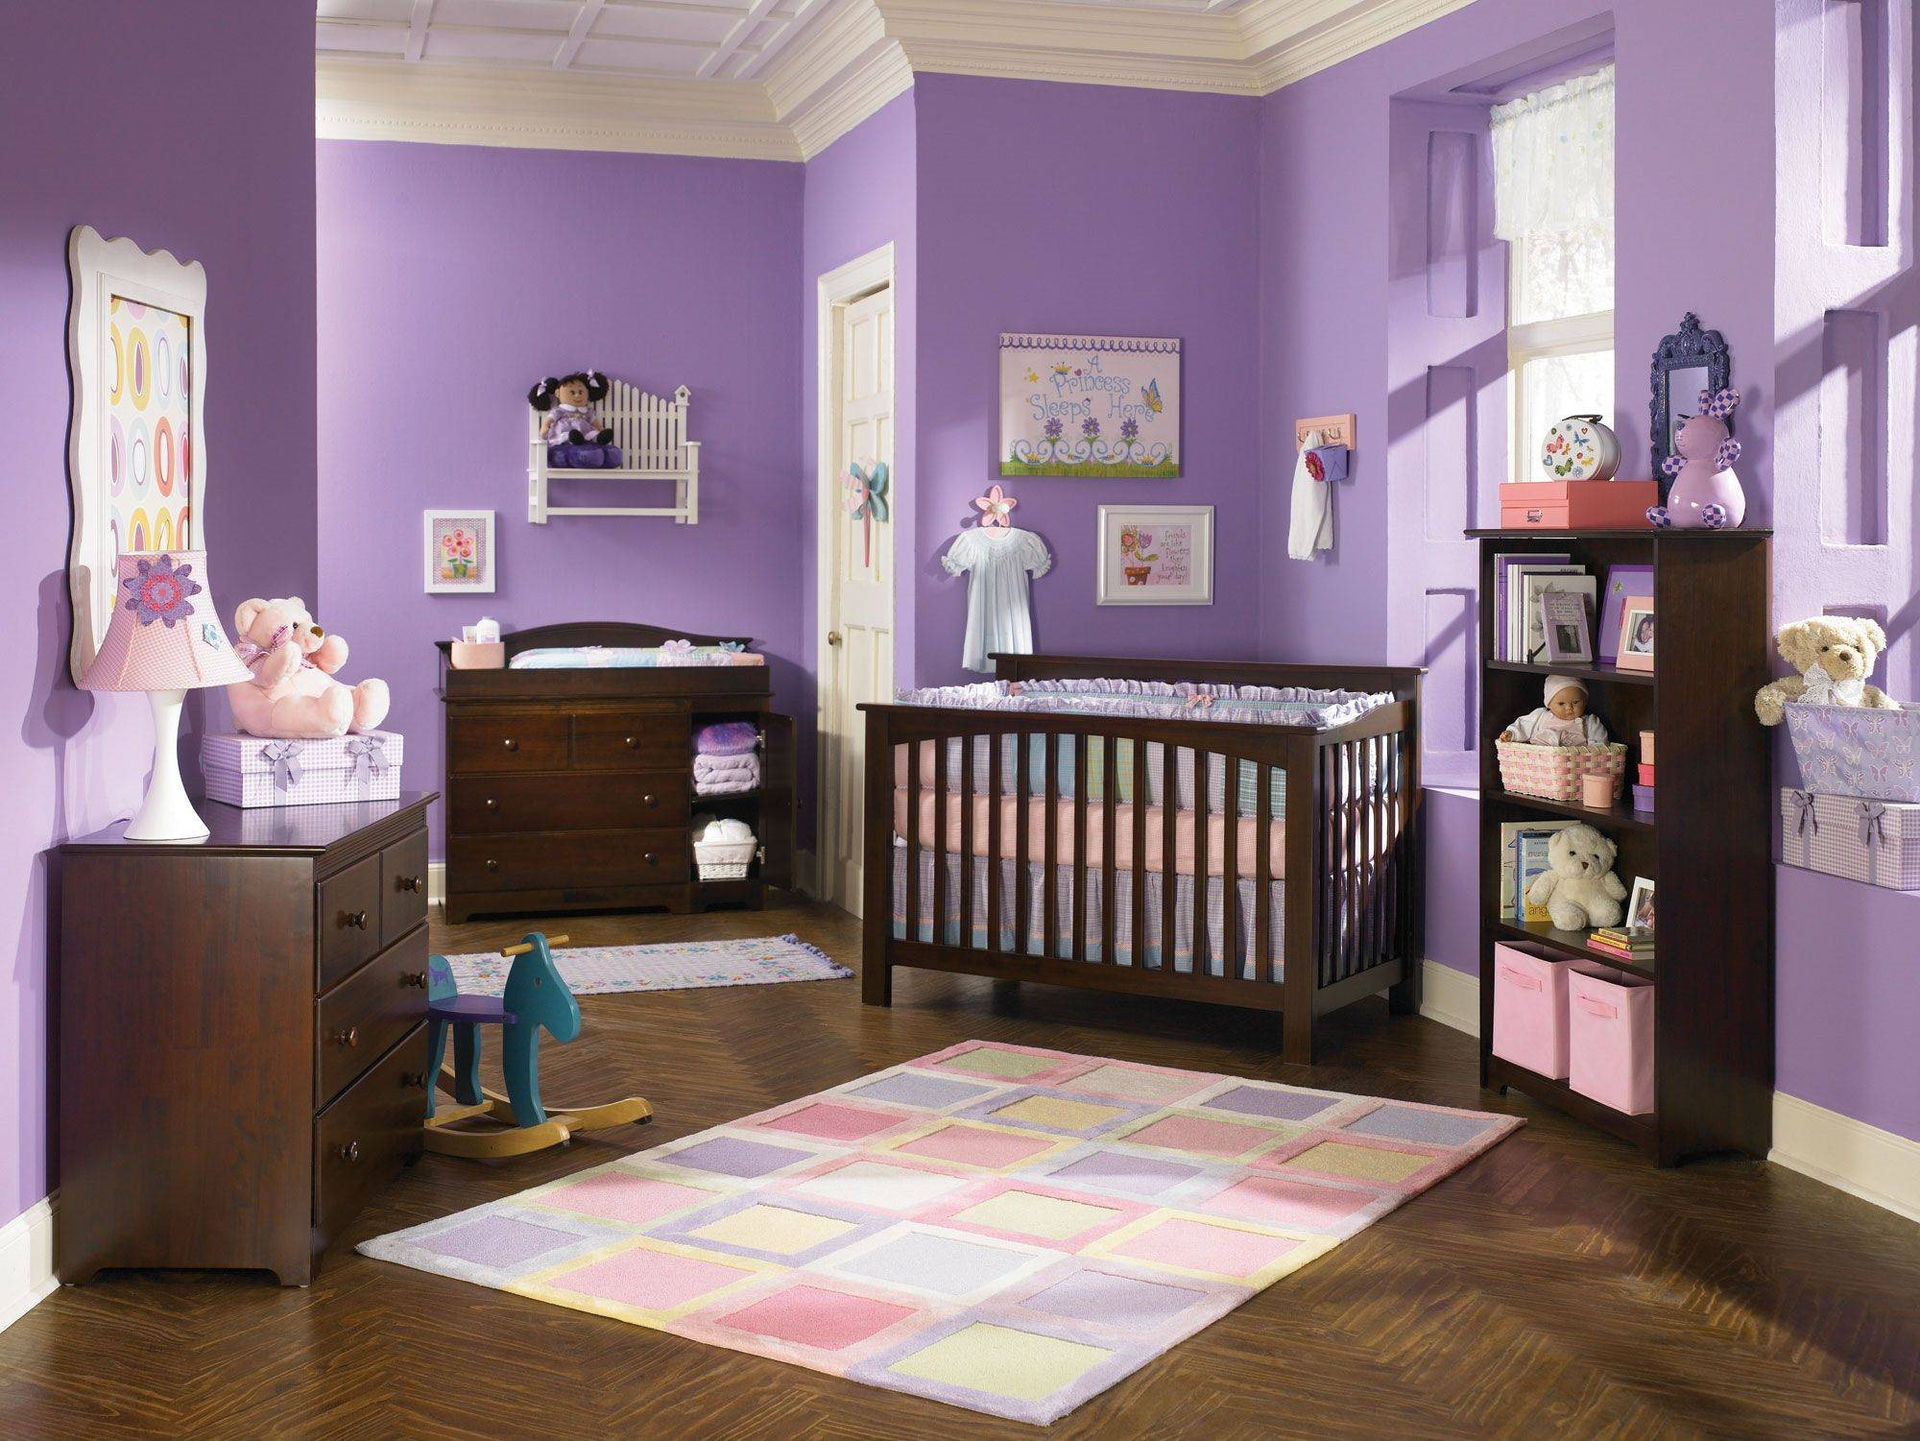 nursery-with-purple-wall-and-brown-furnitures-35842.jpg